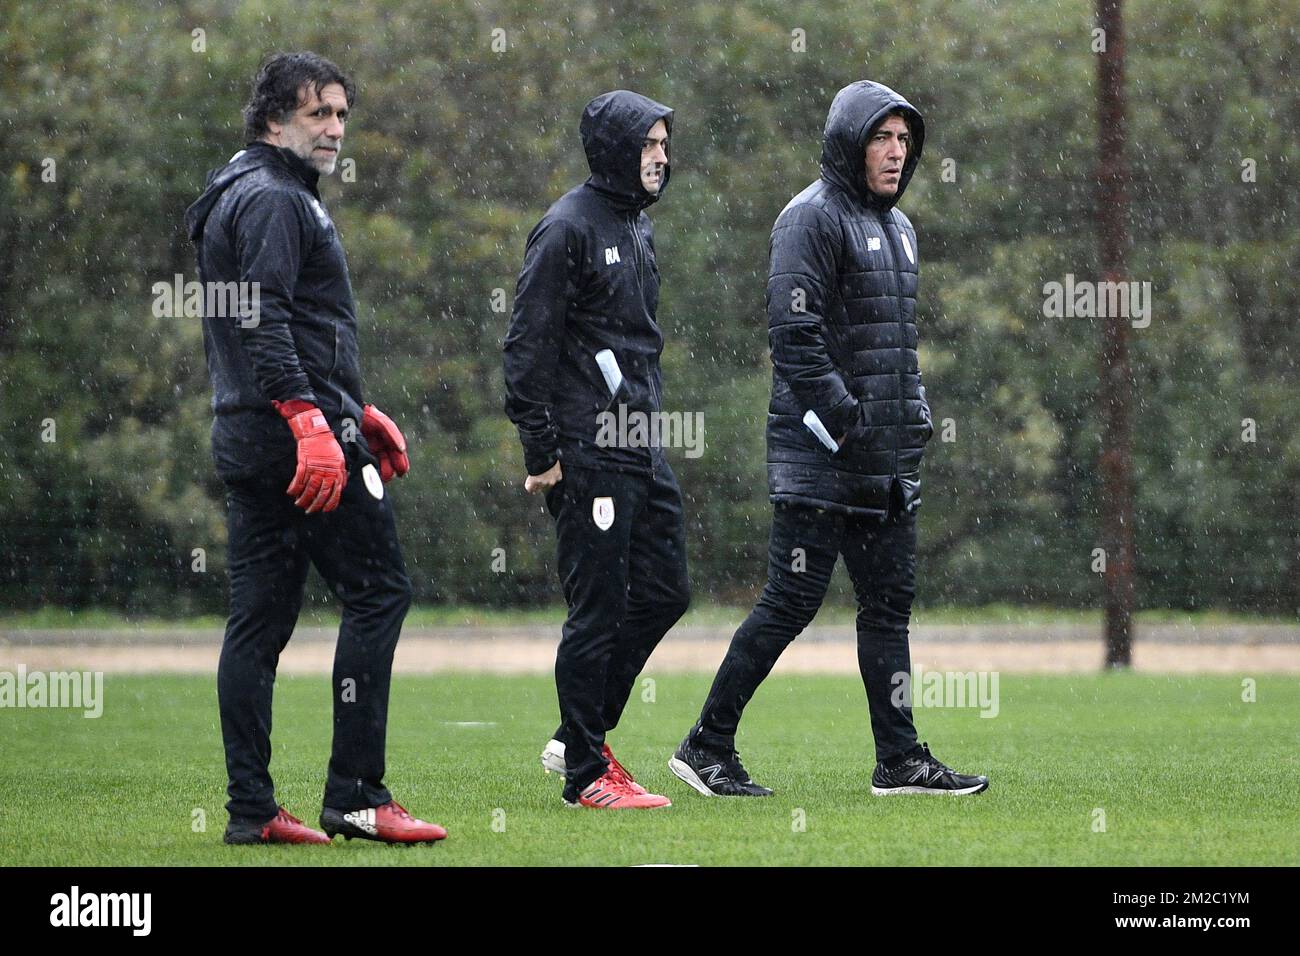 Standard's keeper coach Ricardo Pereira, Standard's assistant coach Rui Mota and Standard's head coach Ricardo Sa Pinto pictured during day five of the winter training camp of Belgian first division soccer team Standard de Liege, in Marbella, Spain, Monday 08 January 2018. BELGA PHOTO YORICK JANSENS Stock Photo